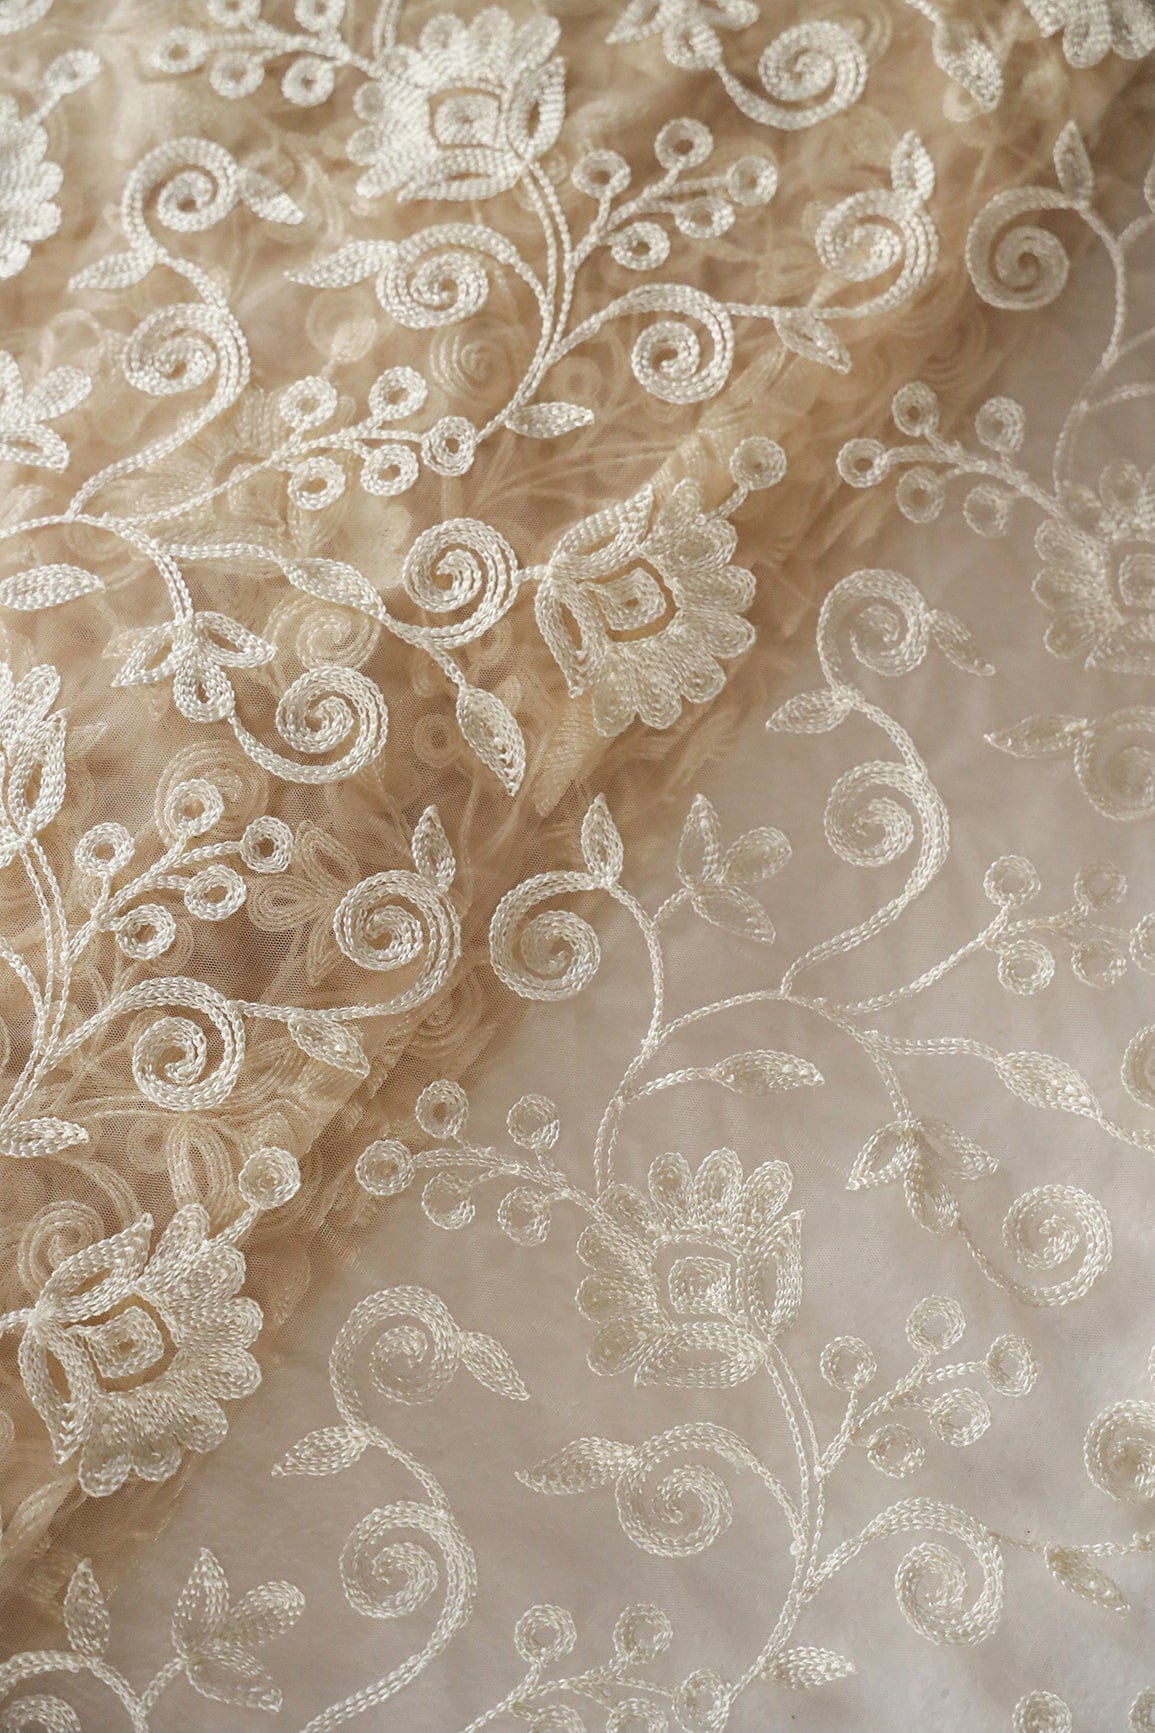 doeraa Embroidery Fabrics White Thread Beautiful Heavy Floral Embroidery On Light Beige Soft Net Fabric